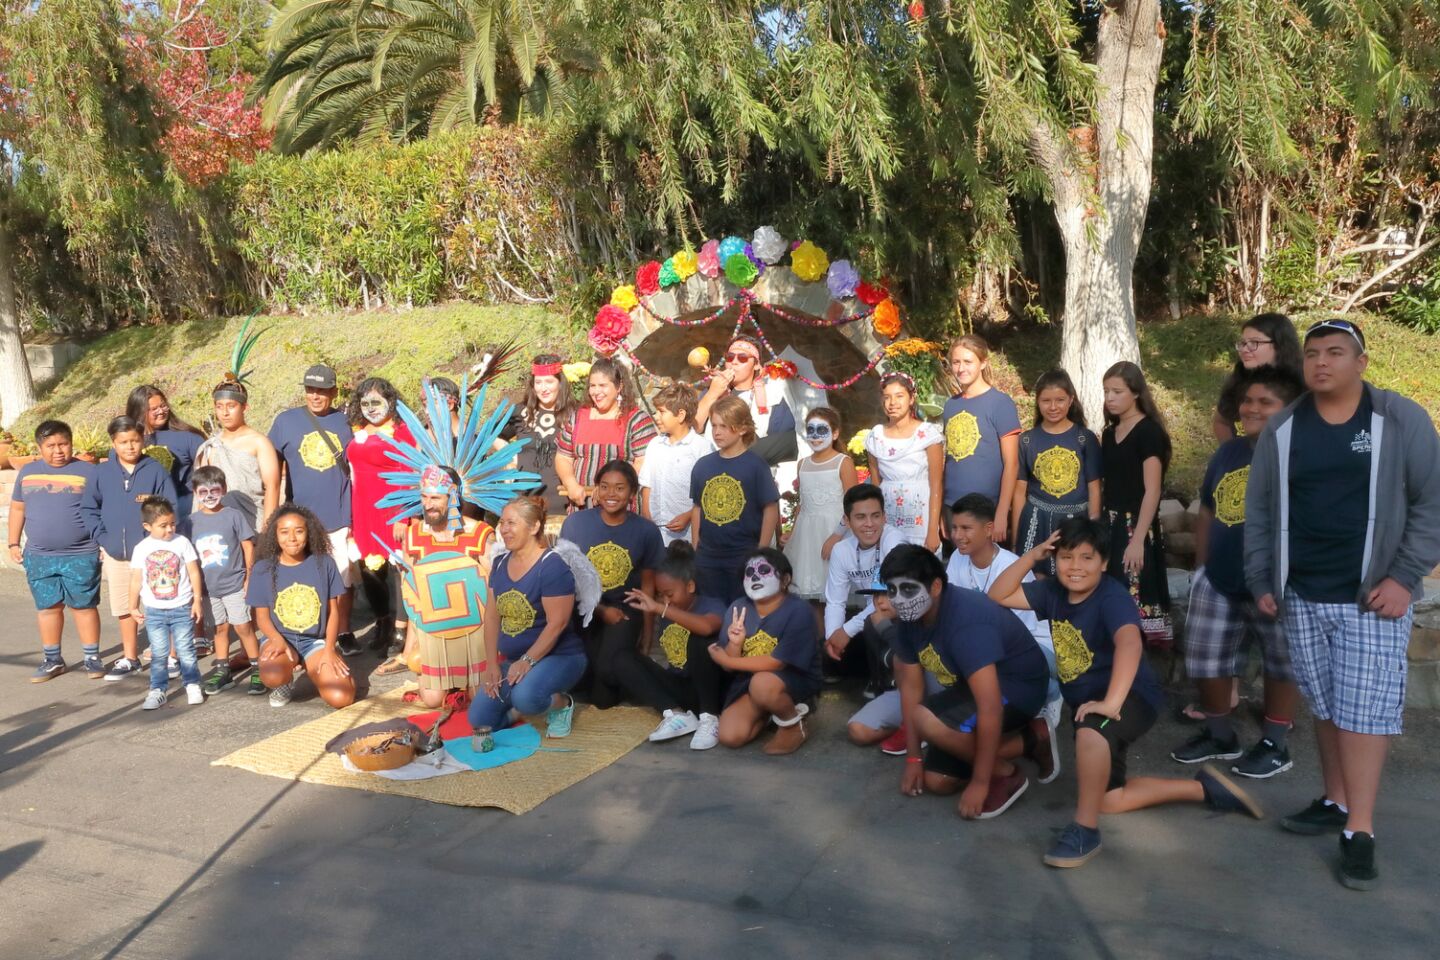 The traditional Aztec dance group Calpulli Omeyocan and local residents gather to celebrate the 10th anniversary of La Clase Mgica after school program